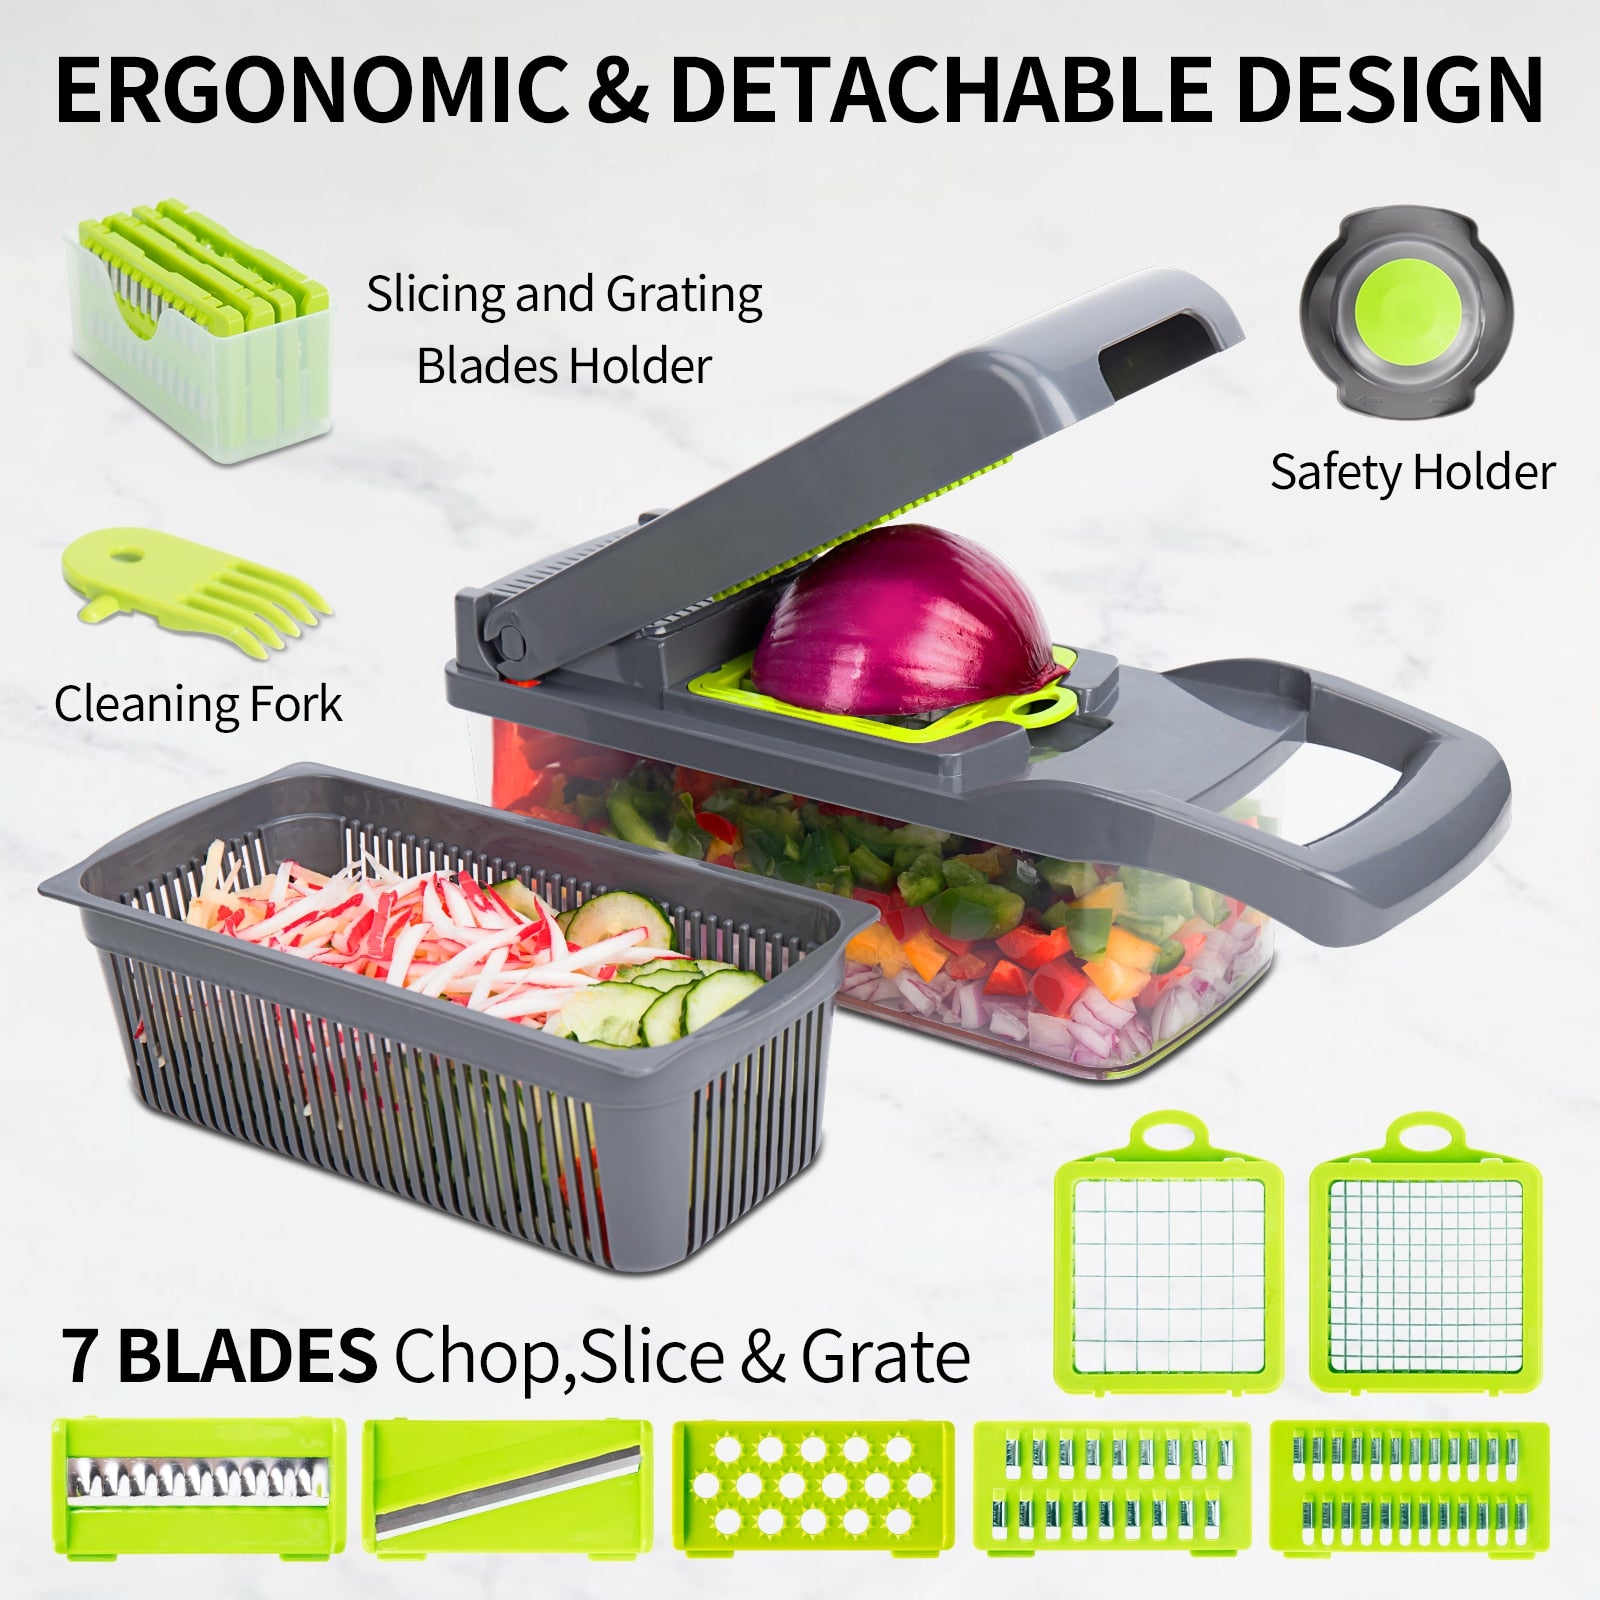 SFXFJ New 12 in 1 Multifunctional Vegetable Cutter with Drain Basket, Magic  Rotate Vegetable Slicer, Mandoline Slicer Cutter Chopper and Grater